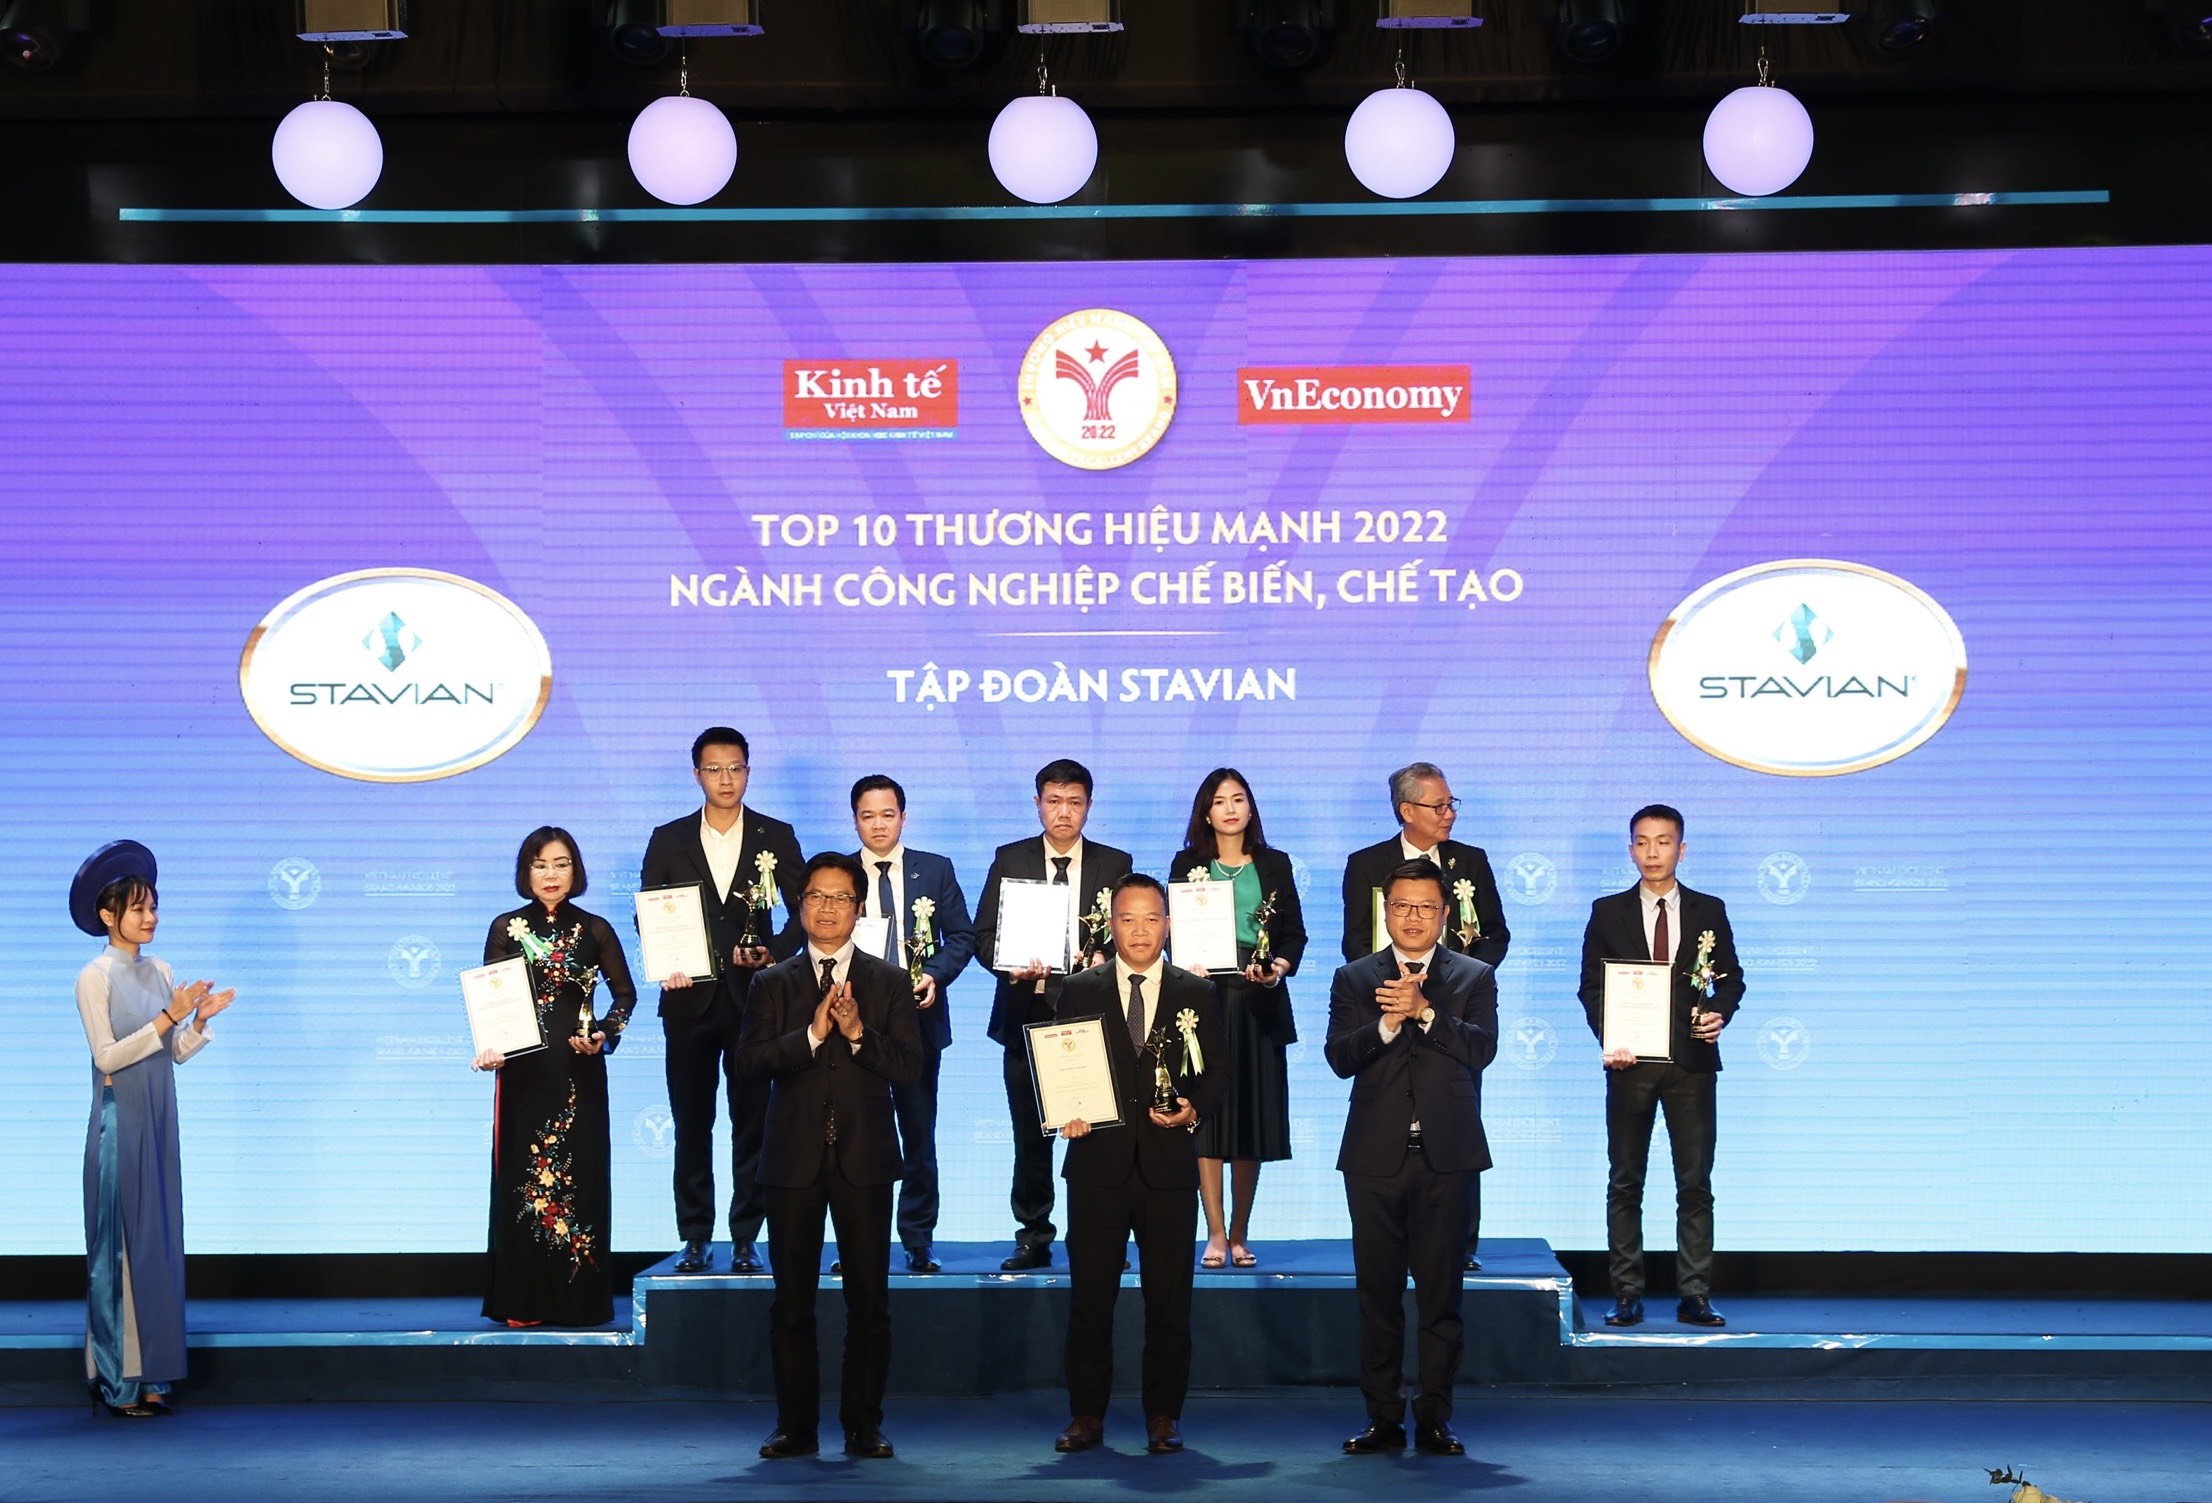 Stavian Group ranks No. 1 among TOP 10 Vietnam Excellent Brands 2022 – Processing & Manufacturing Category